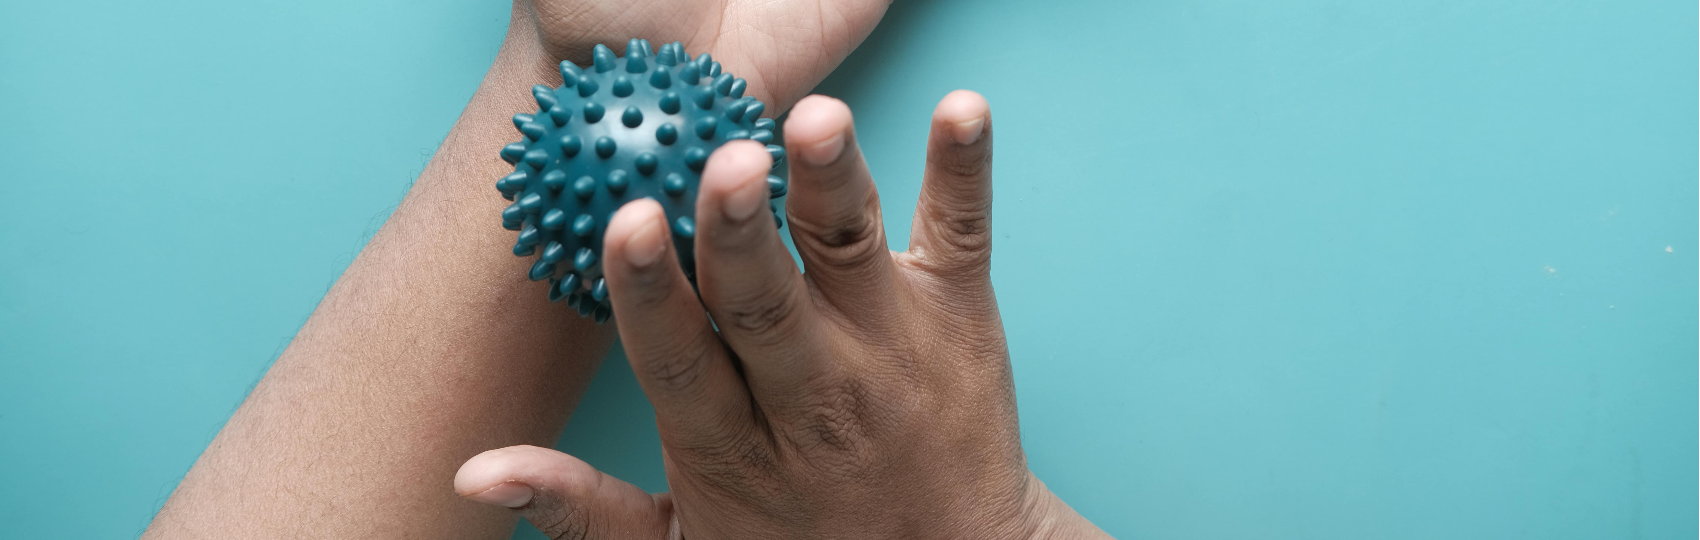 Using Massage Balls To Relieve Aches & Pains And Improve Mobility